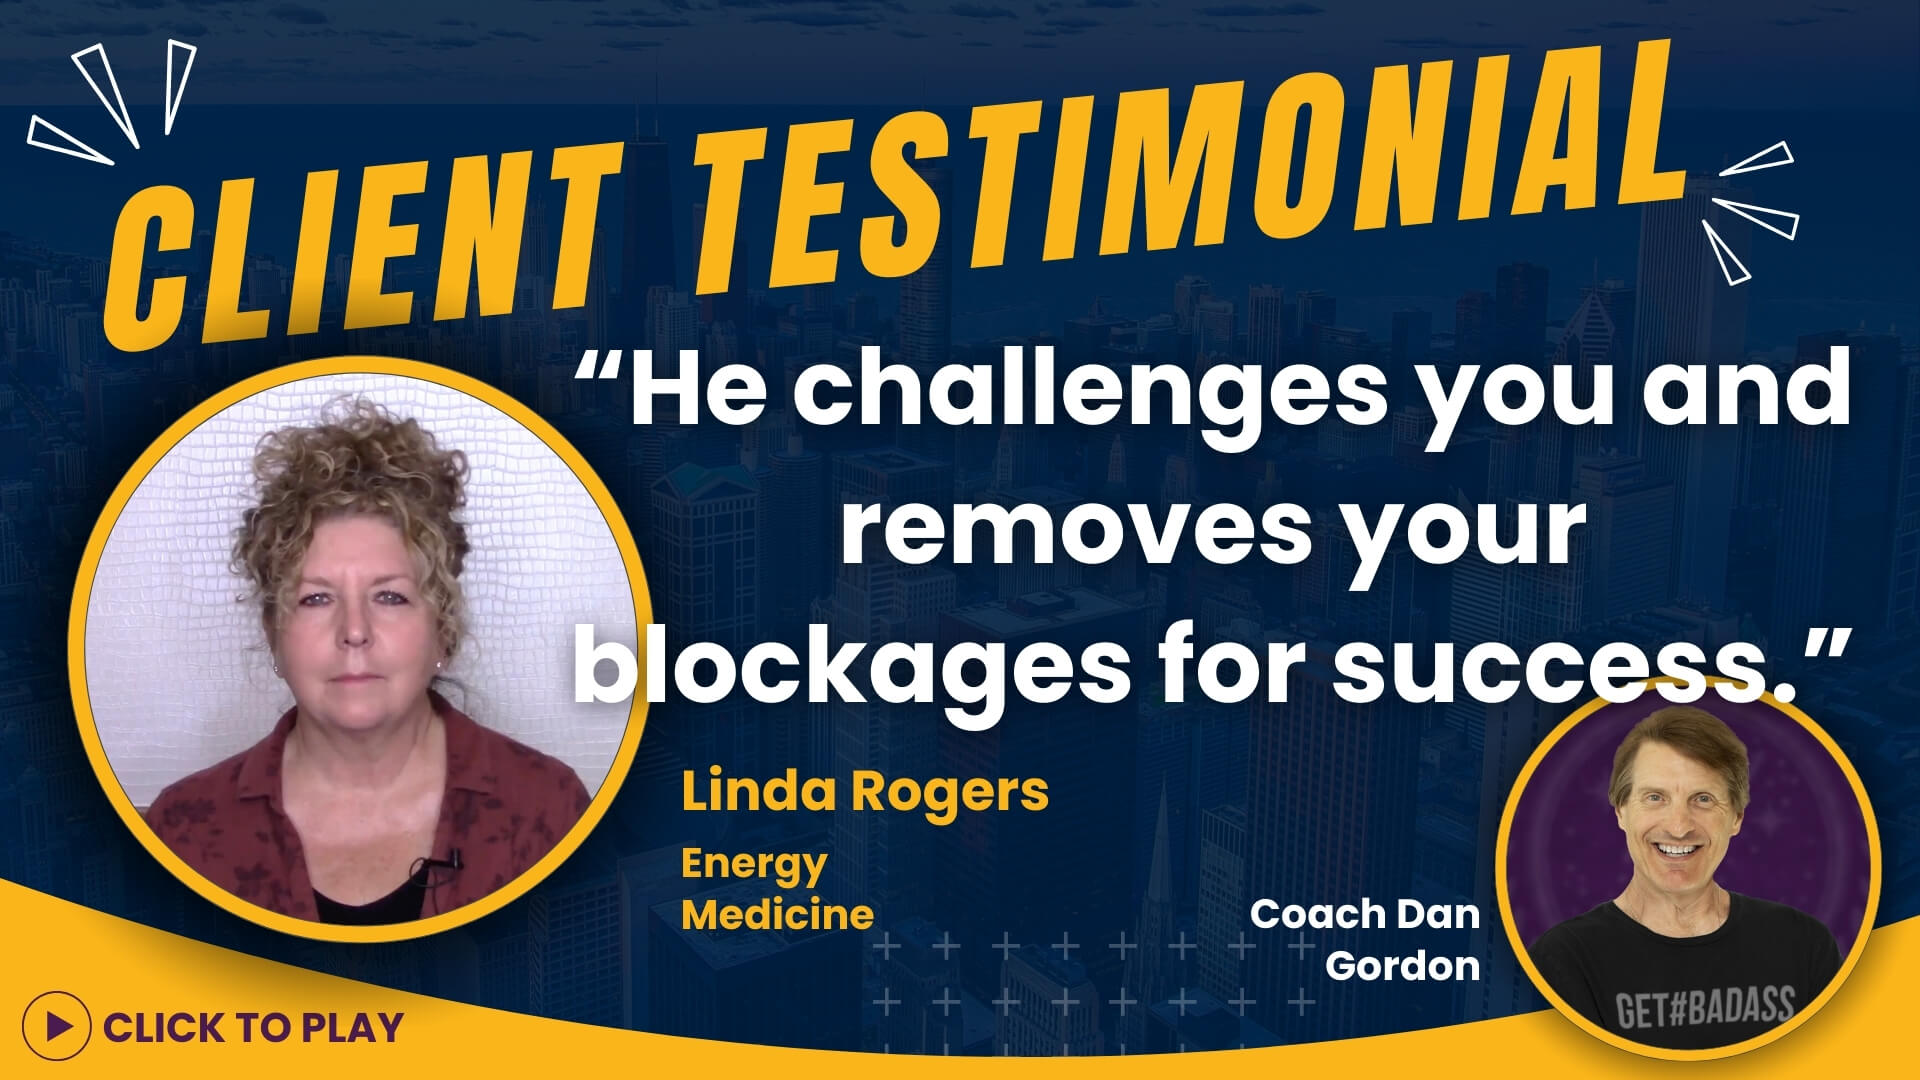 Client testimonial by Linda Rogers in Energy Medicine endorsing Coach Dan Gordon, featuring both individuals' headshots with a 'click to play' icon and positive quote.